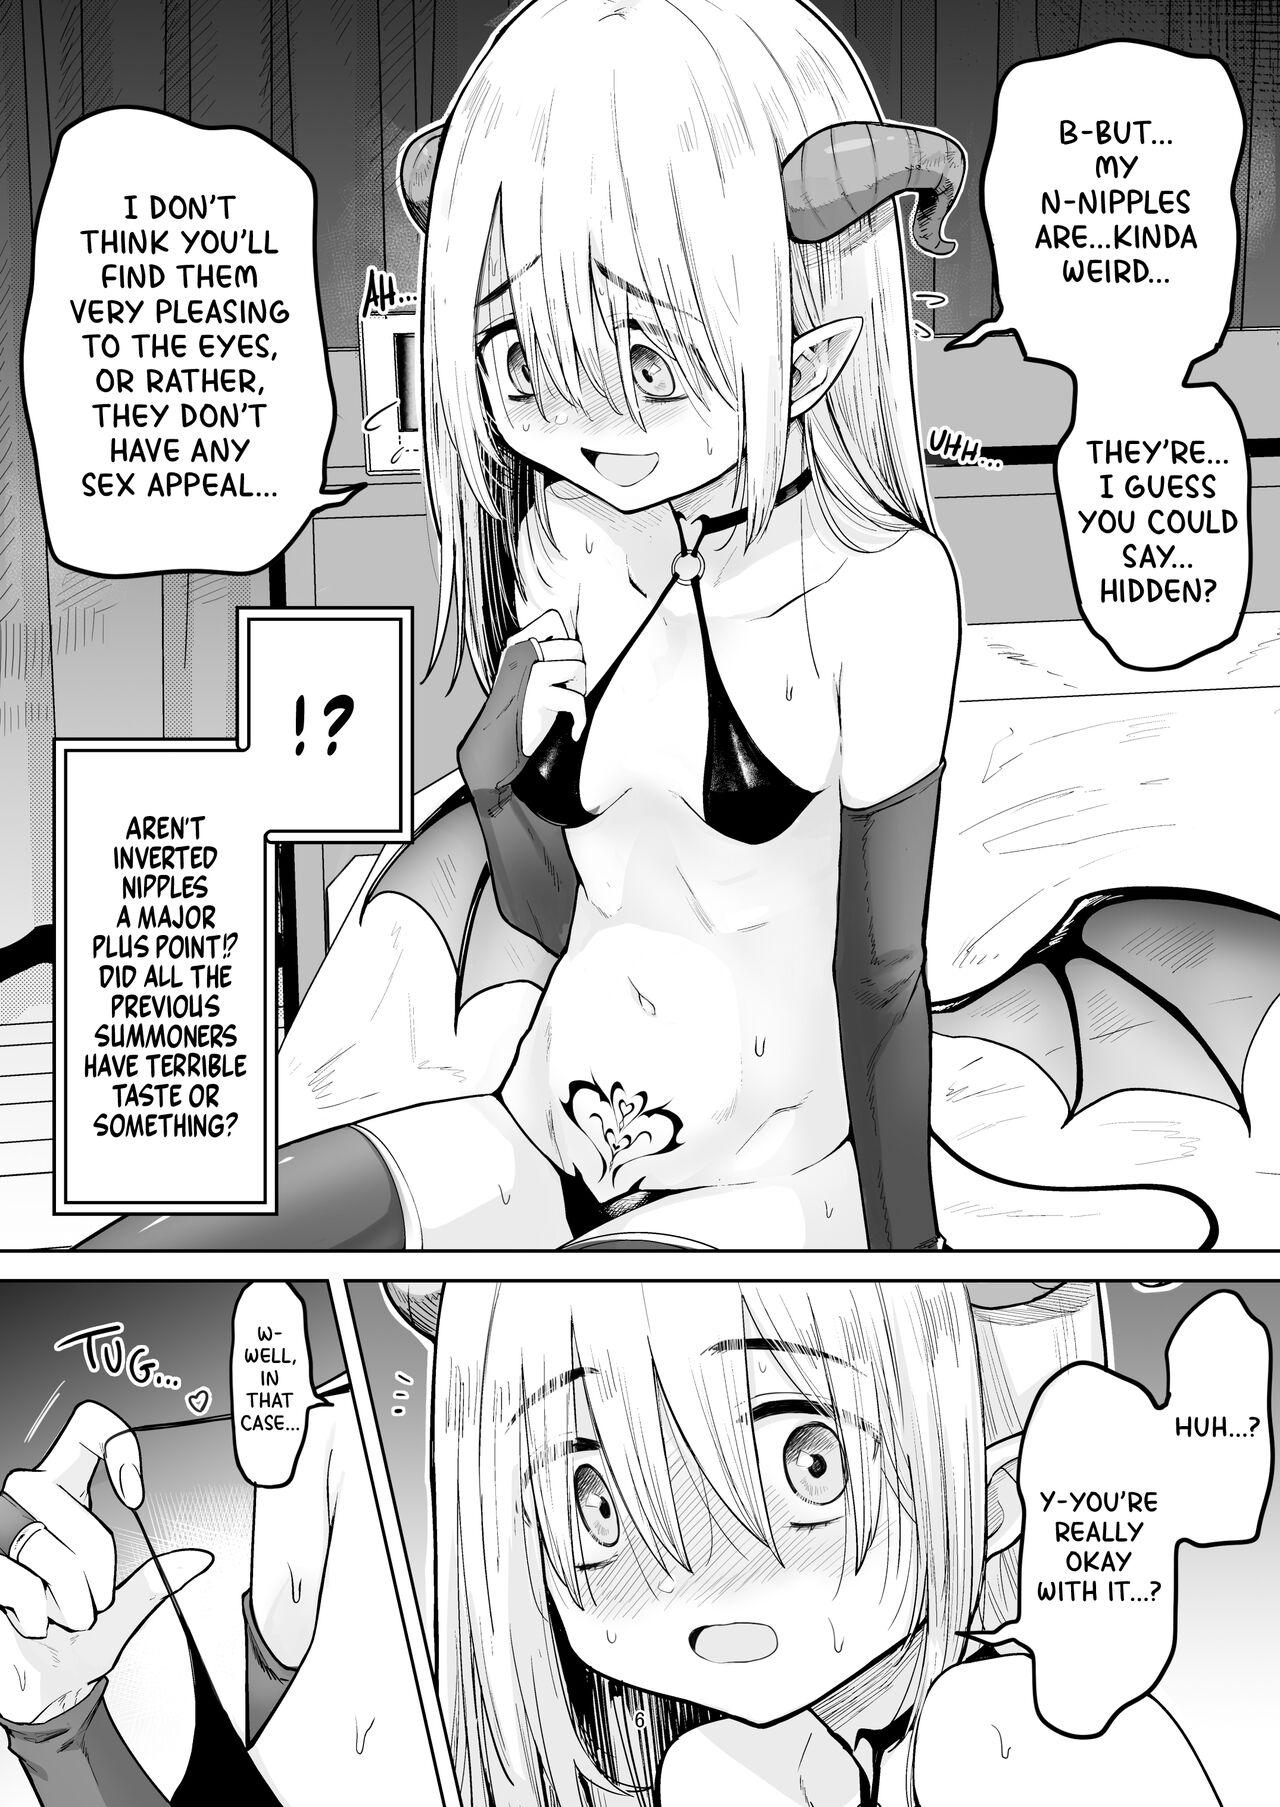 Solo Female A Tiny Titty Negative Succubus Has Arrived - Original Moms - Page 5